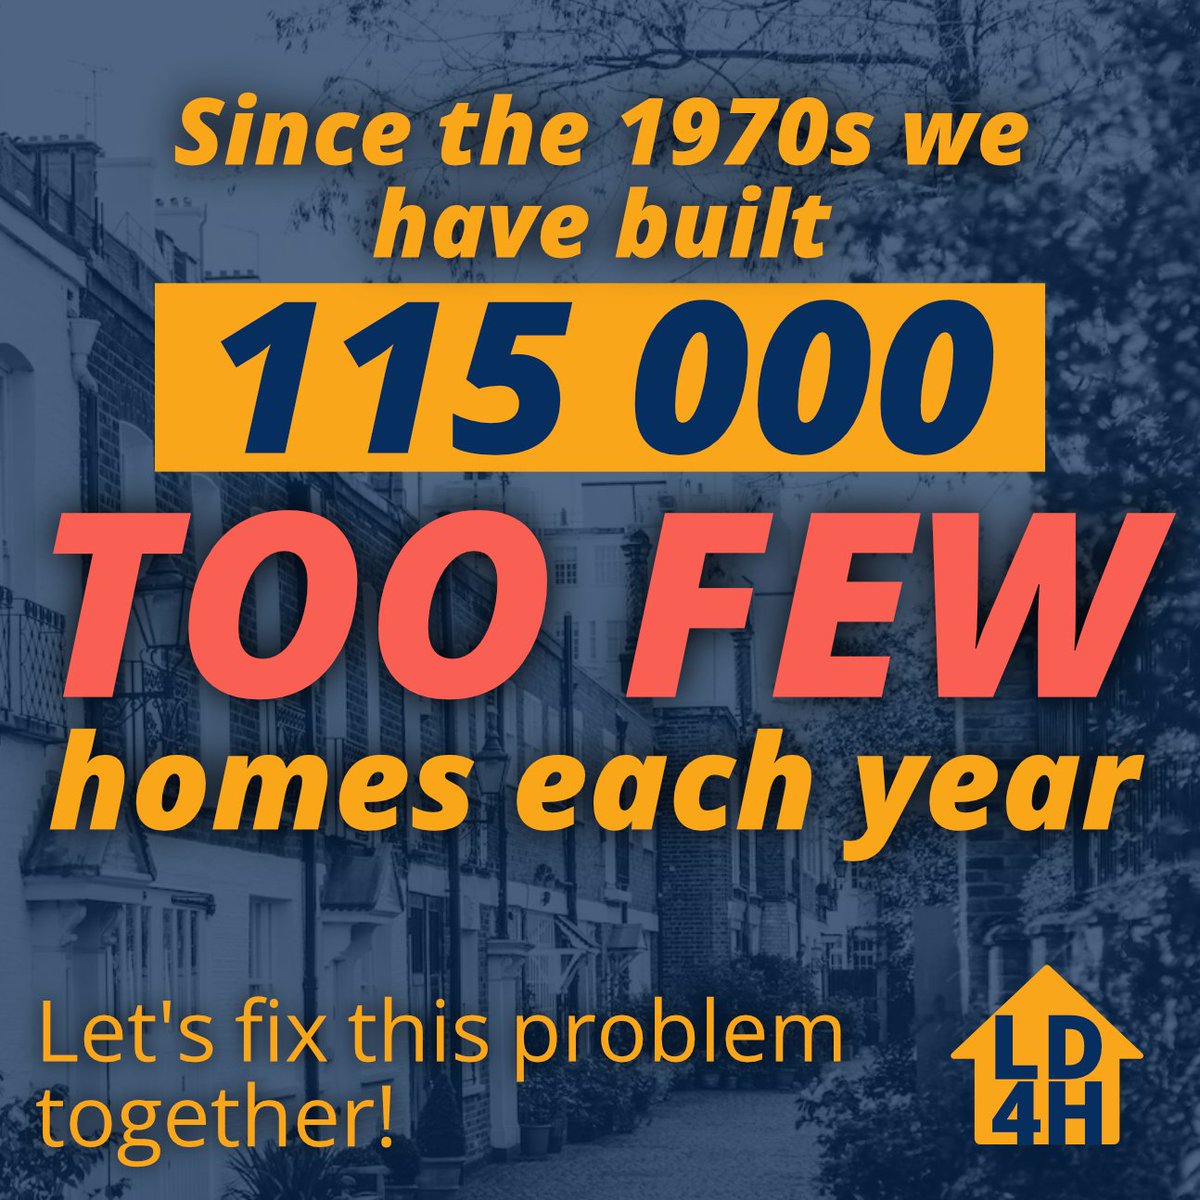 Since the 1970s, we've built 115,000 TOO FEW homes each year. Let's fix this problem together - libhousing.com